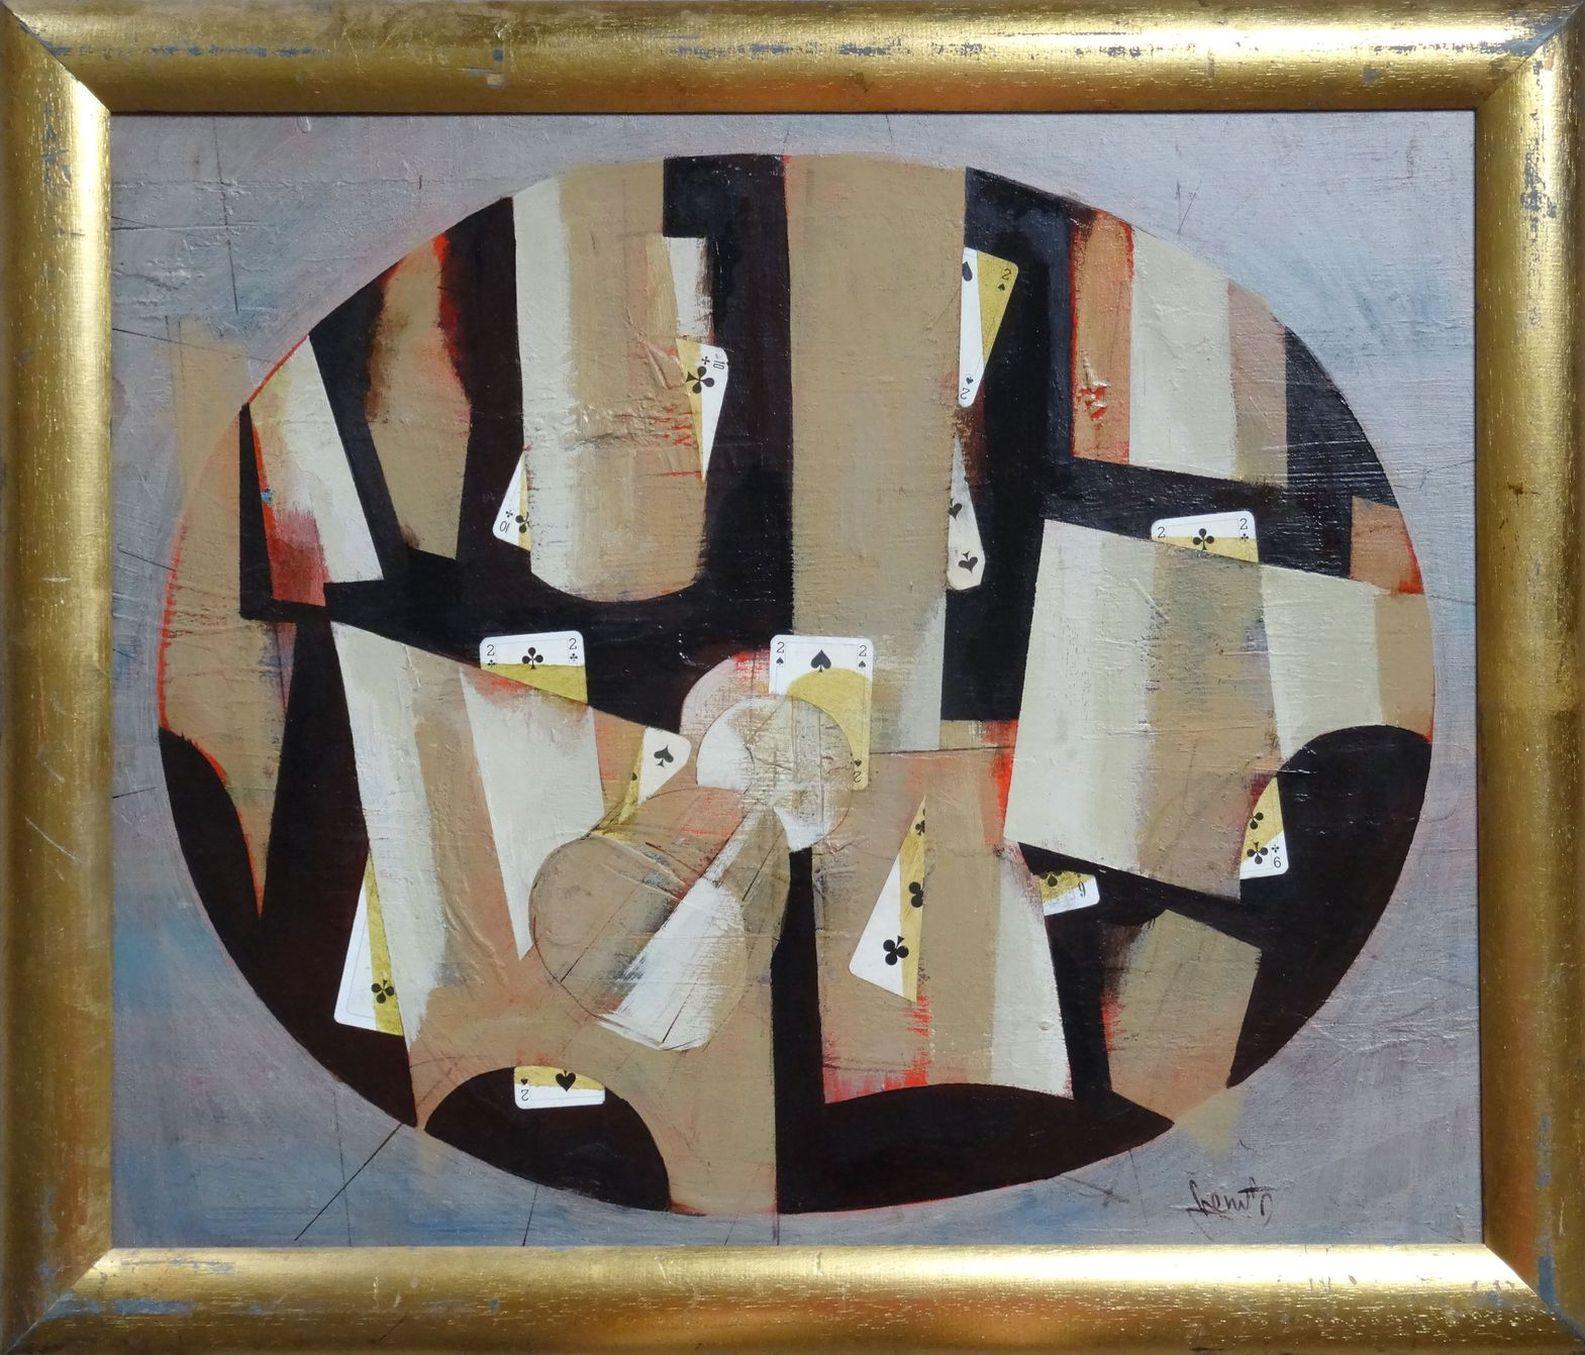 Inverted glass. 1998, oil, collage on cardboard, 45x59 cm